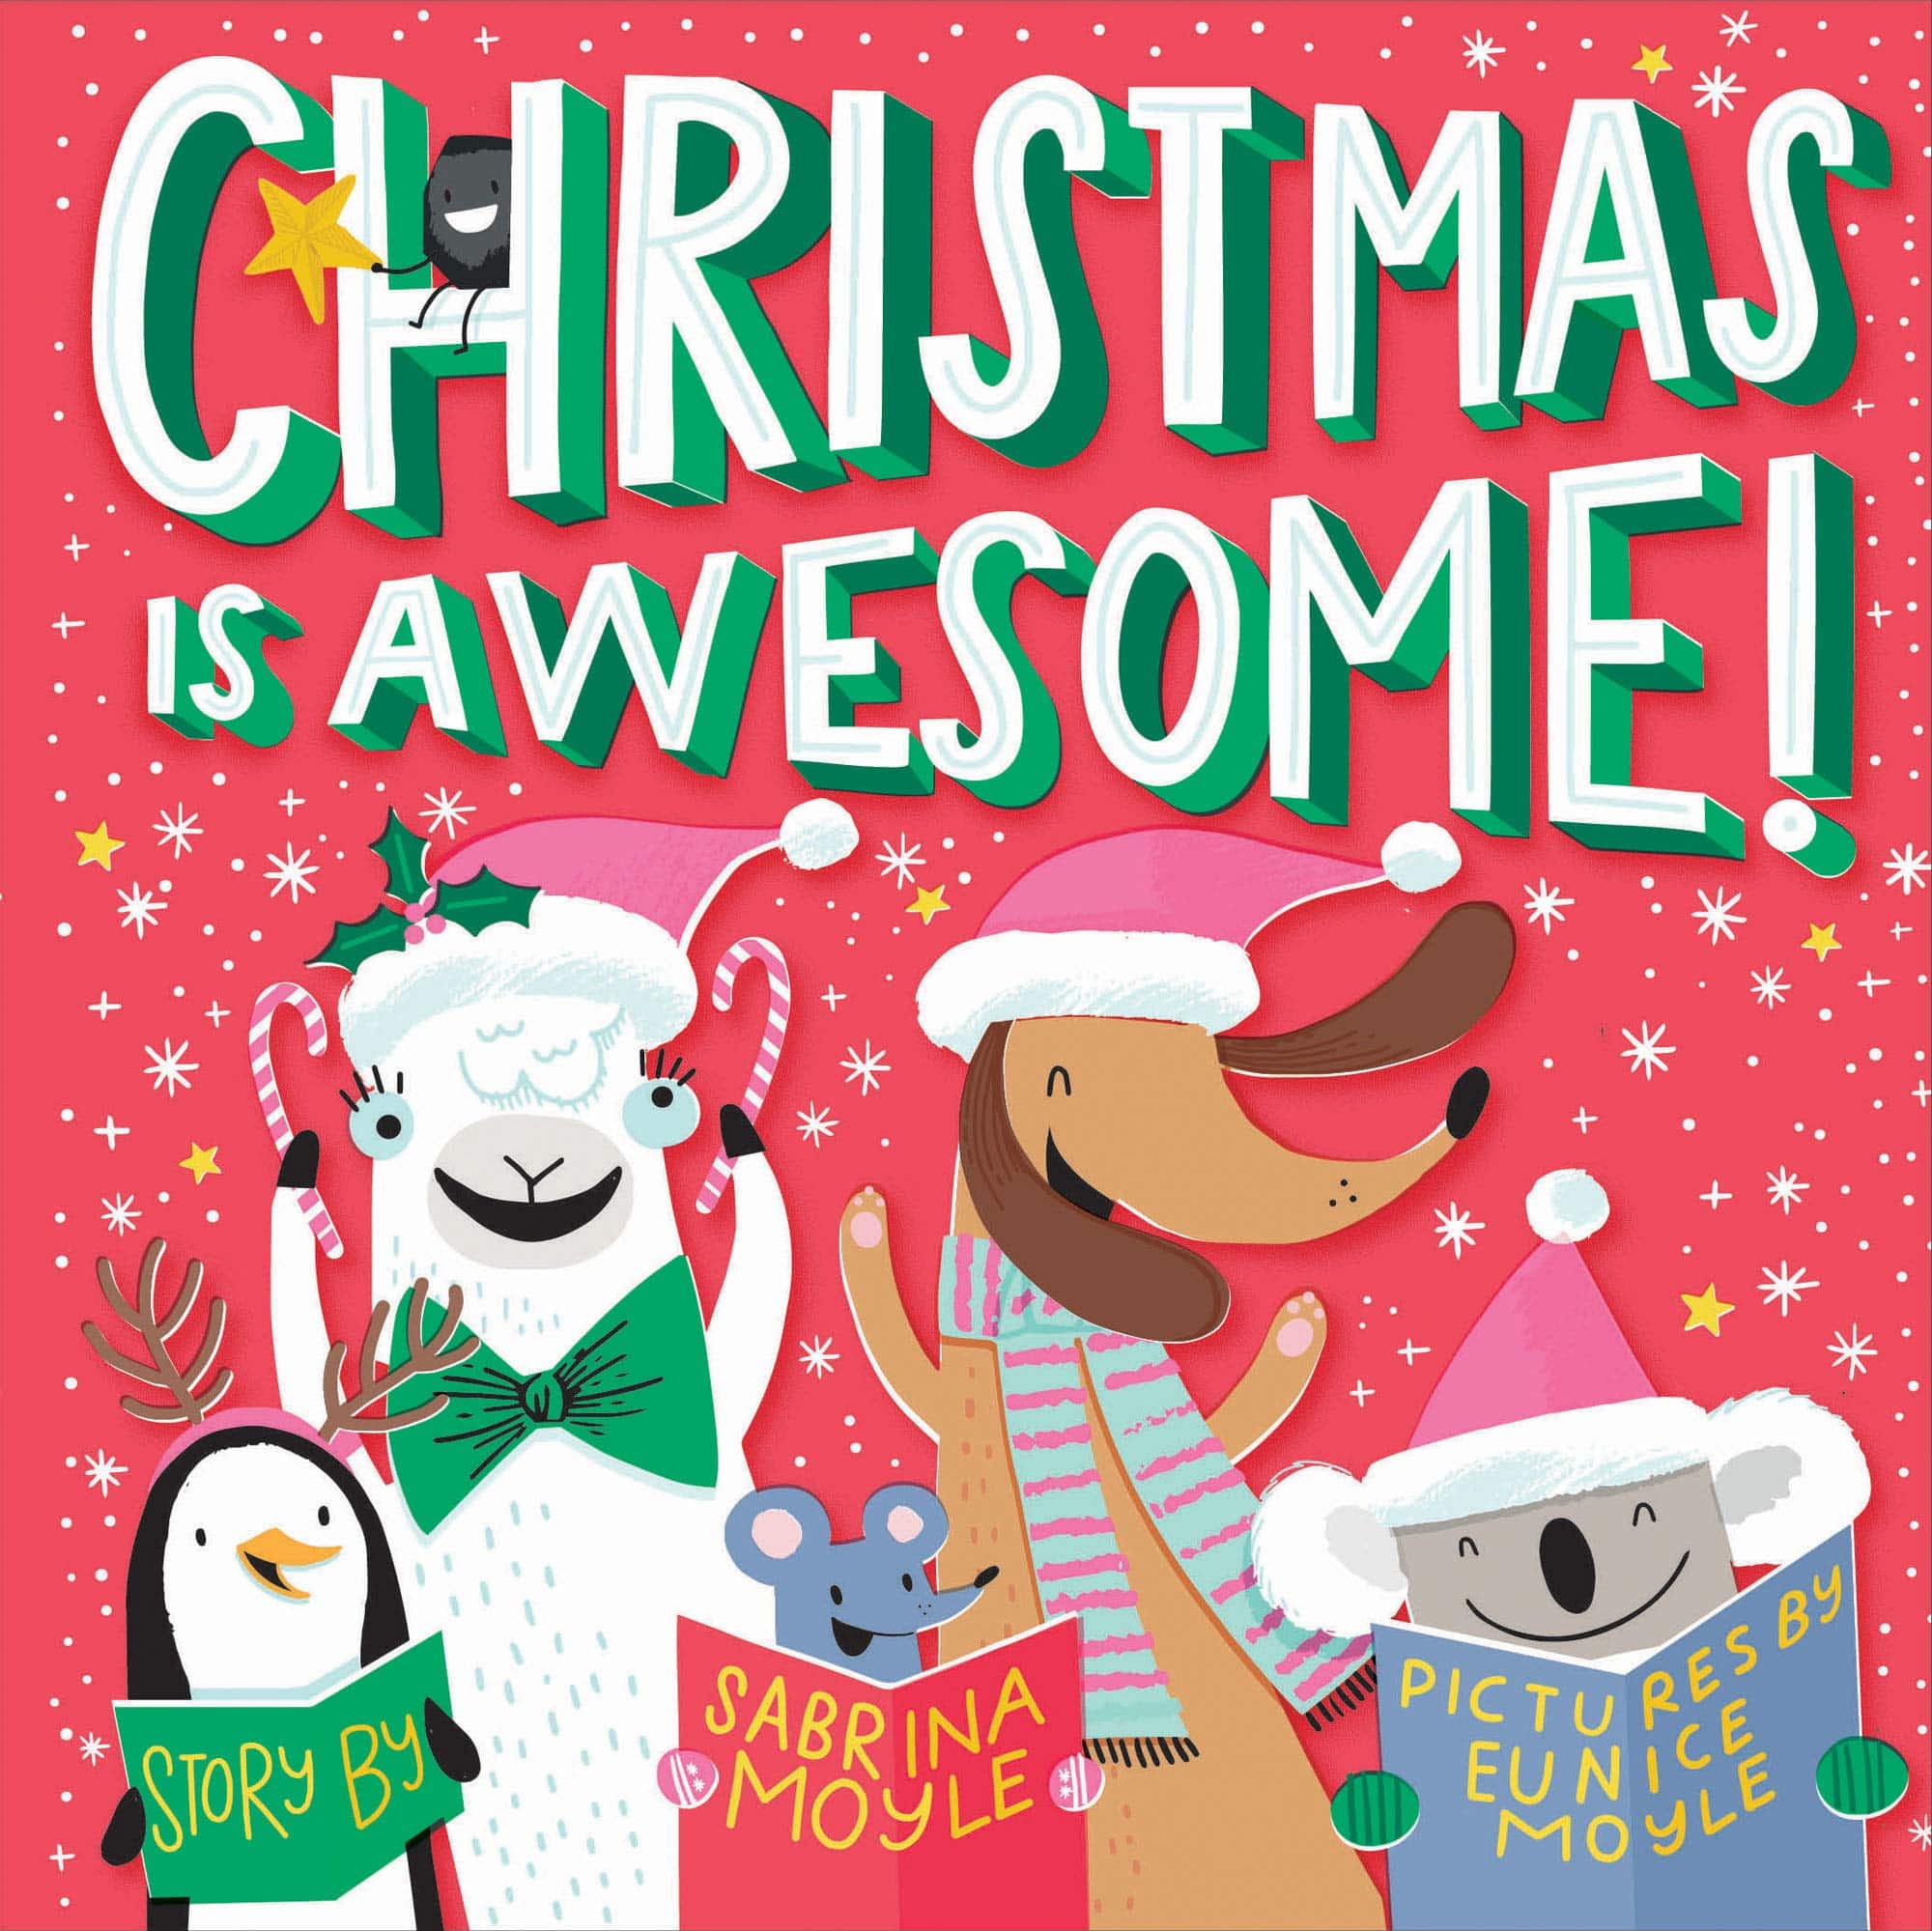 Christmas Is Awesome! - Twinkle Twinkle Little One